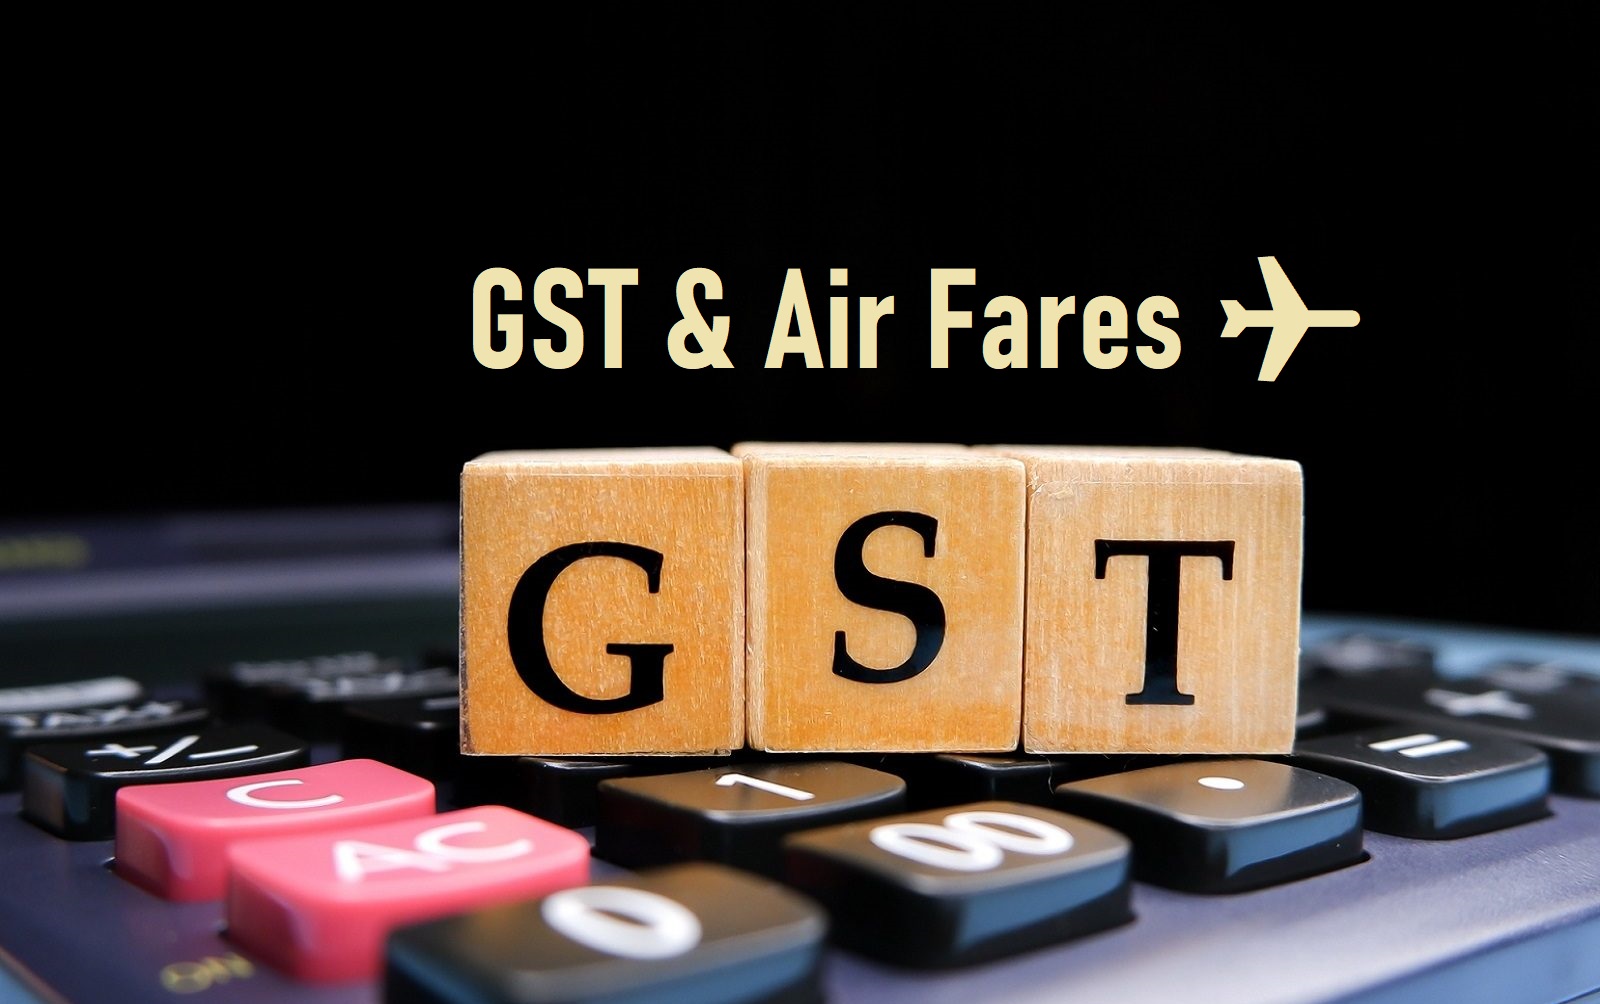 GST on Flight Tickets: Understanding the Impact of GST on Air Fares